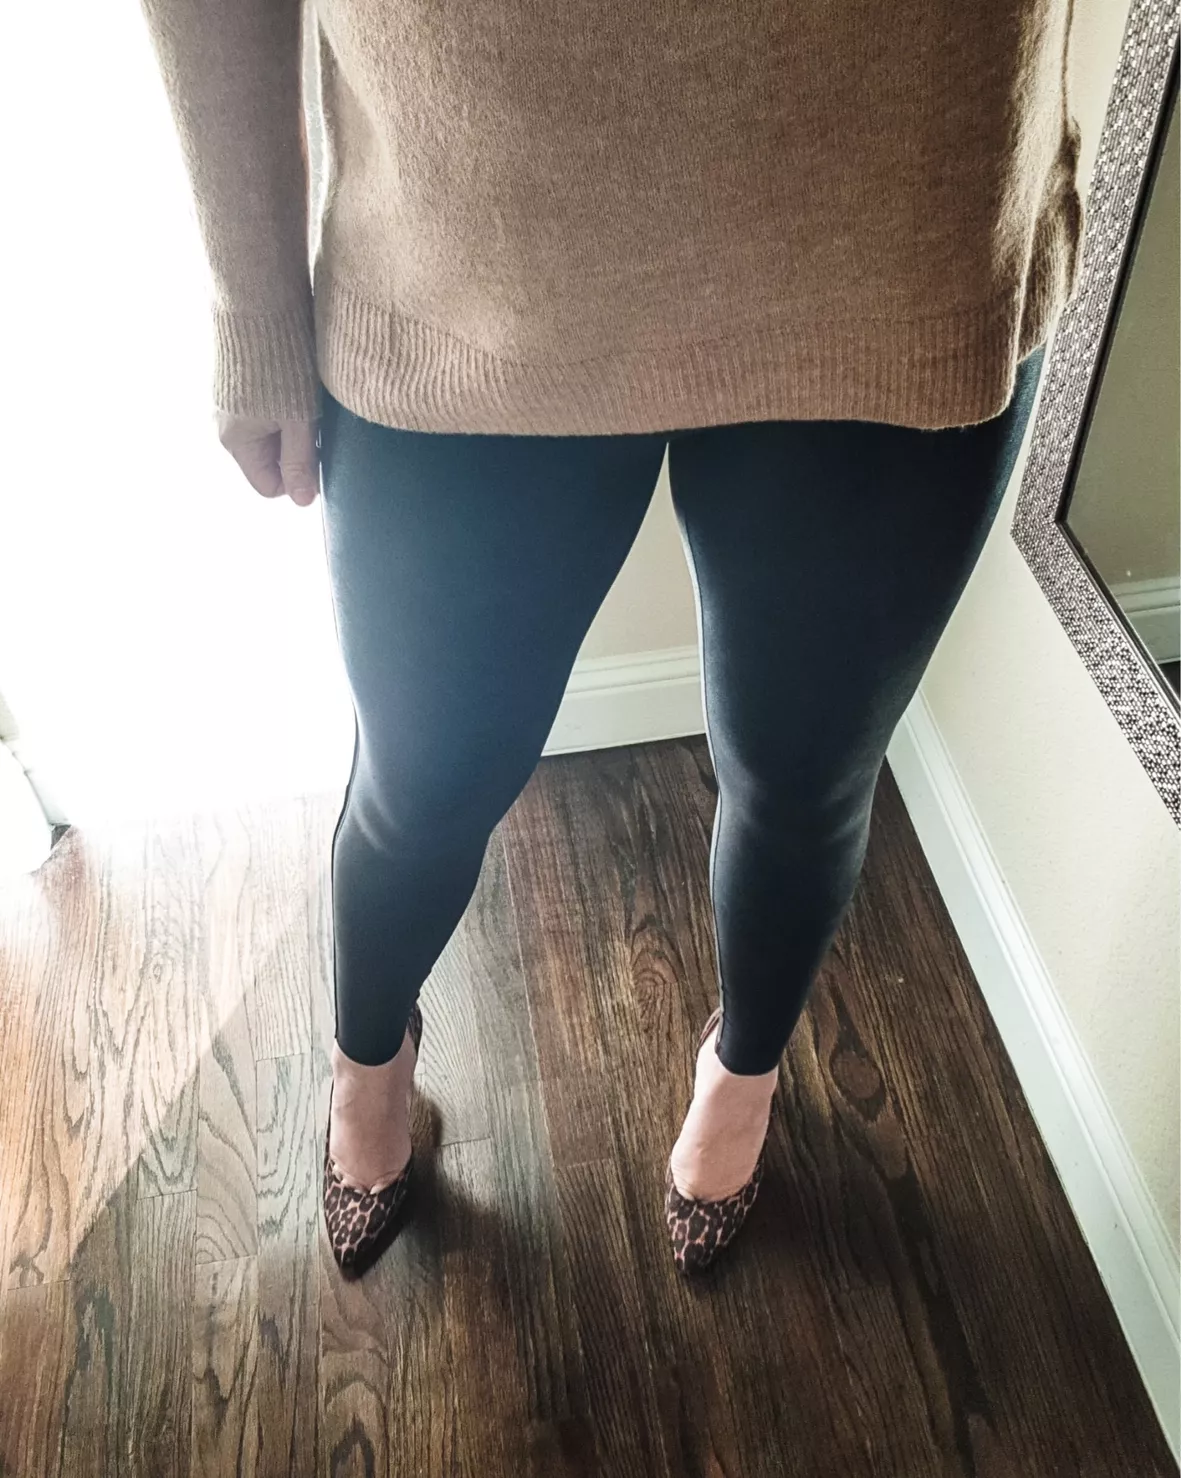 Spanx leggings: Get these faux leather bottoms for a huge discount